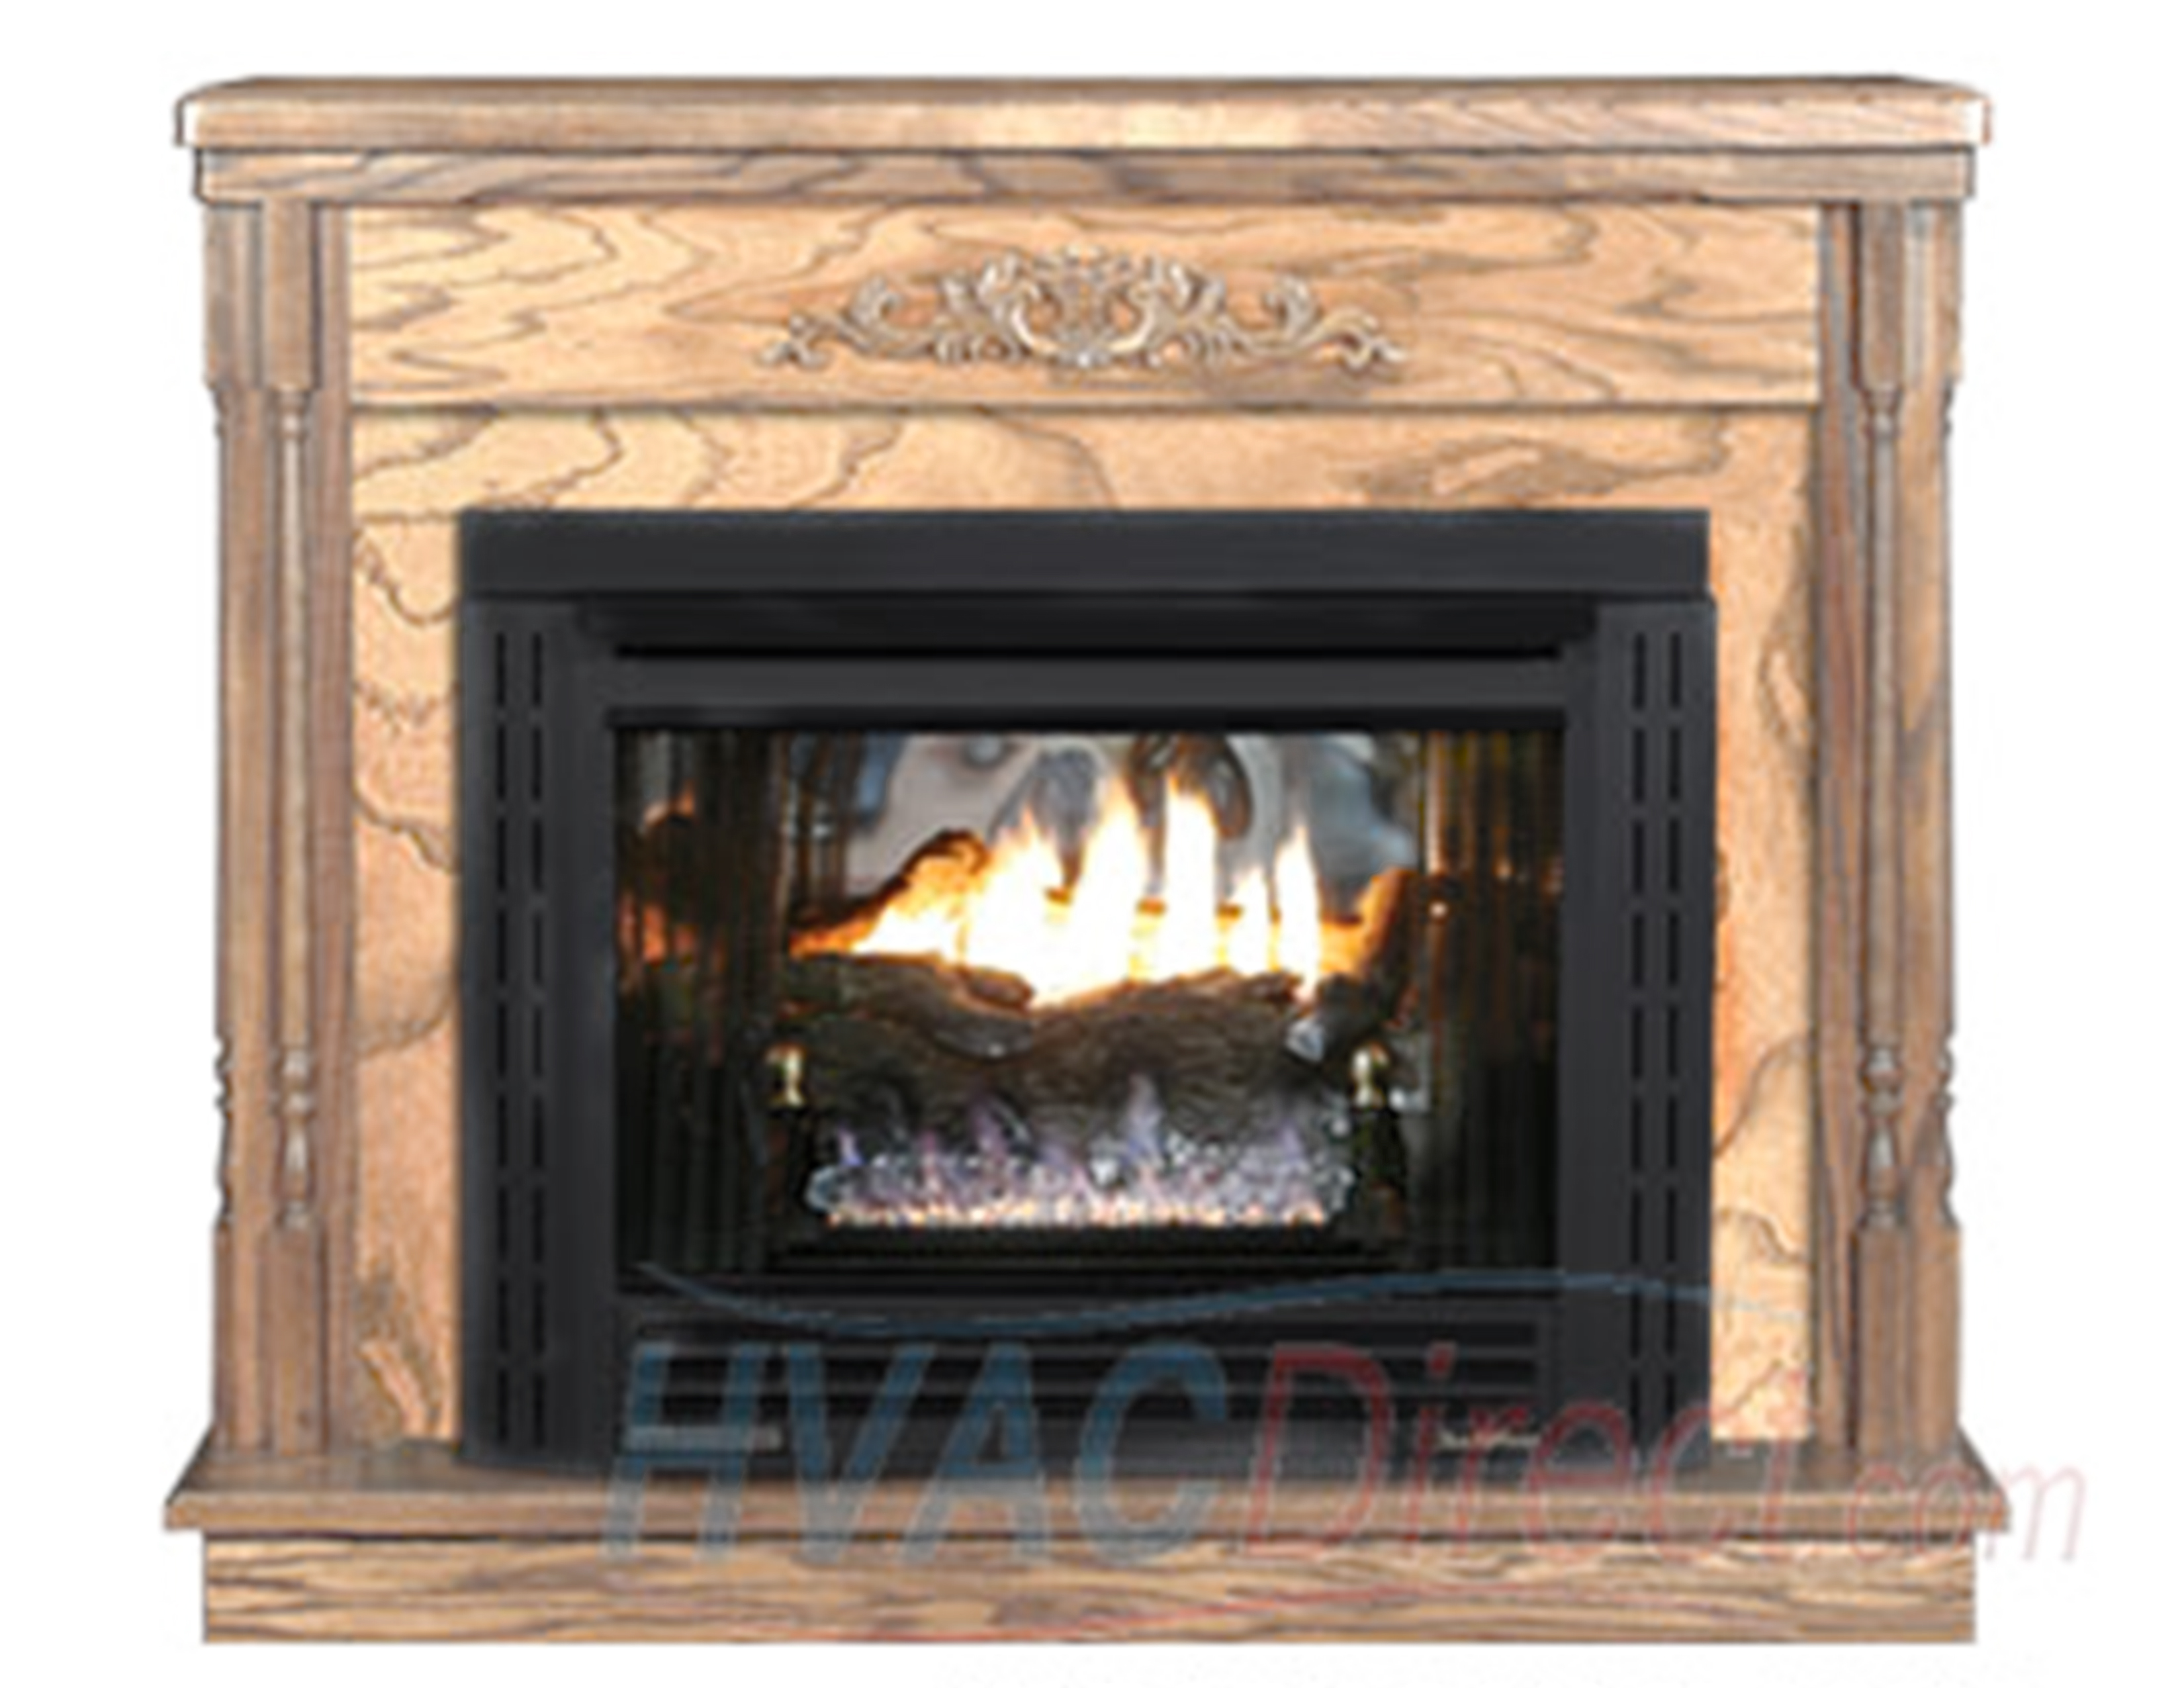 Ventless Lp Gas Fireplace Awesome Buck Stove Model 34zc Vent Free Gas Fireplace